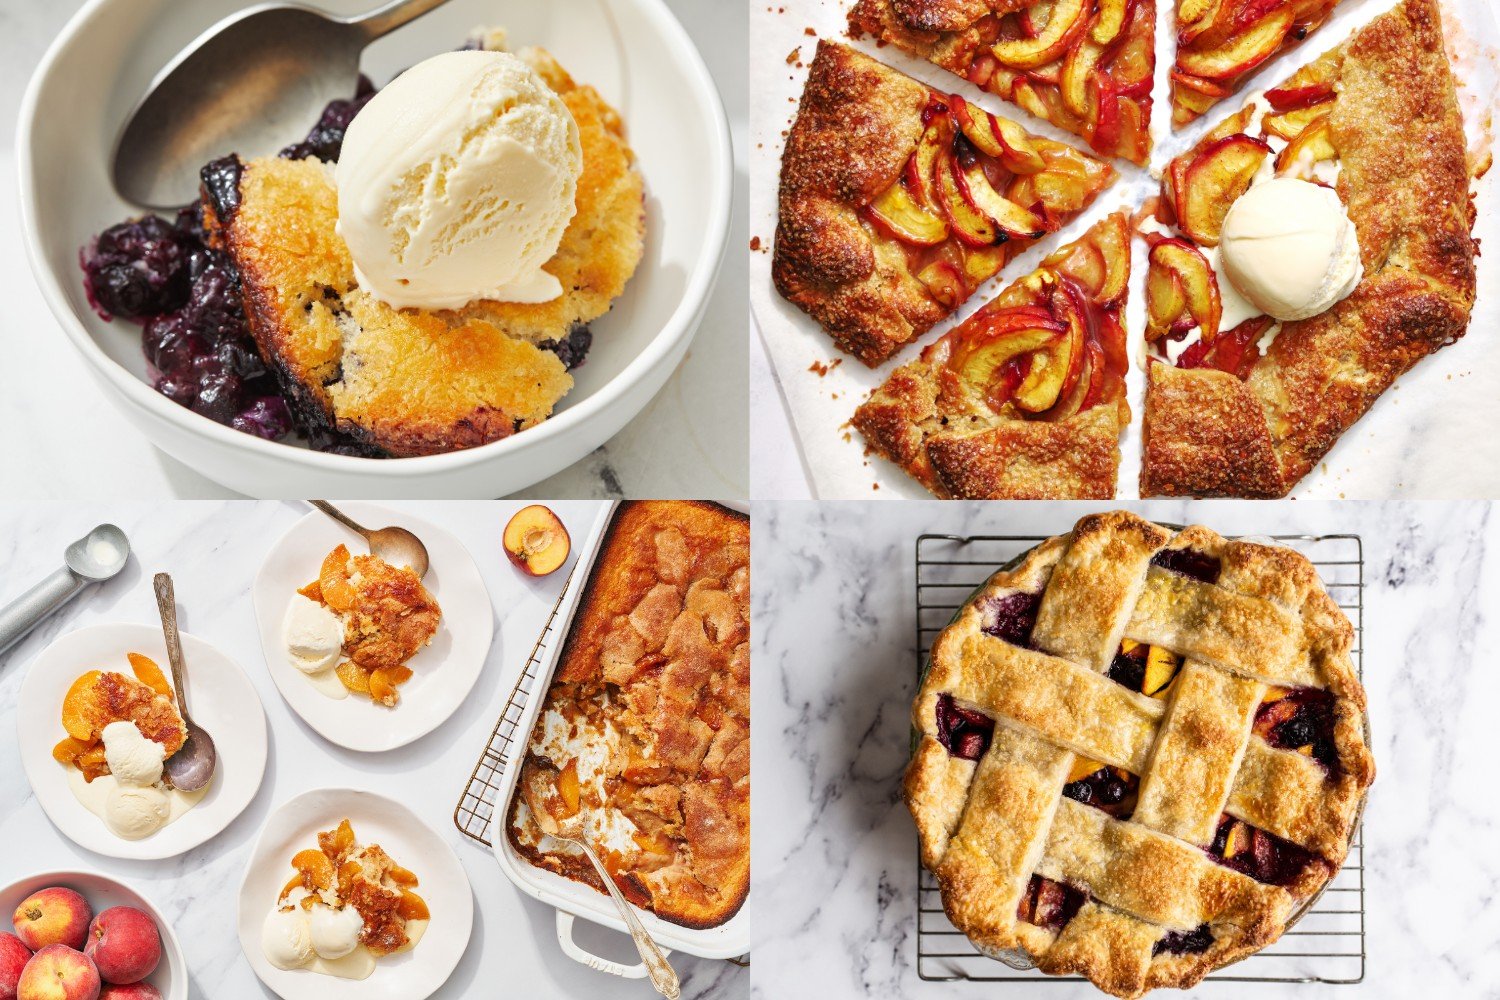 four side-by-side images of summer pies and cobblers: blueberry cobbler, peach galette, peach cobbler, and blueberry peach pie.